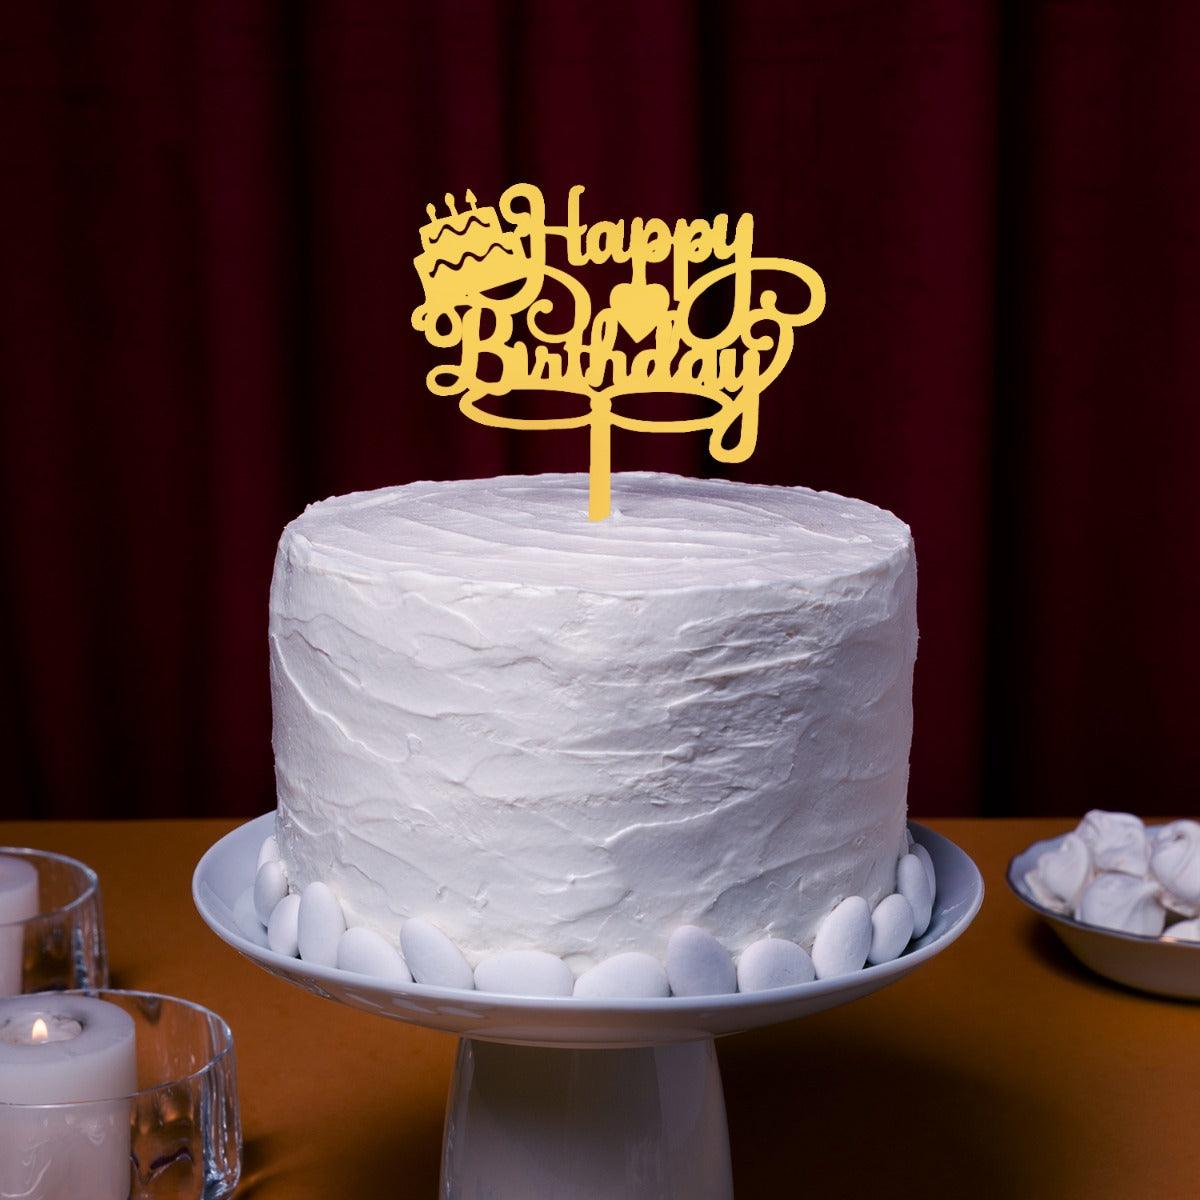 PartyCorp Gold Acrylic Happy Birthday With Cake & Heart Cake Topper, 1 Piece